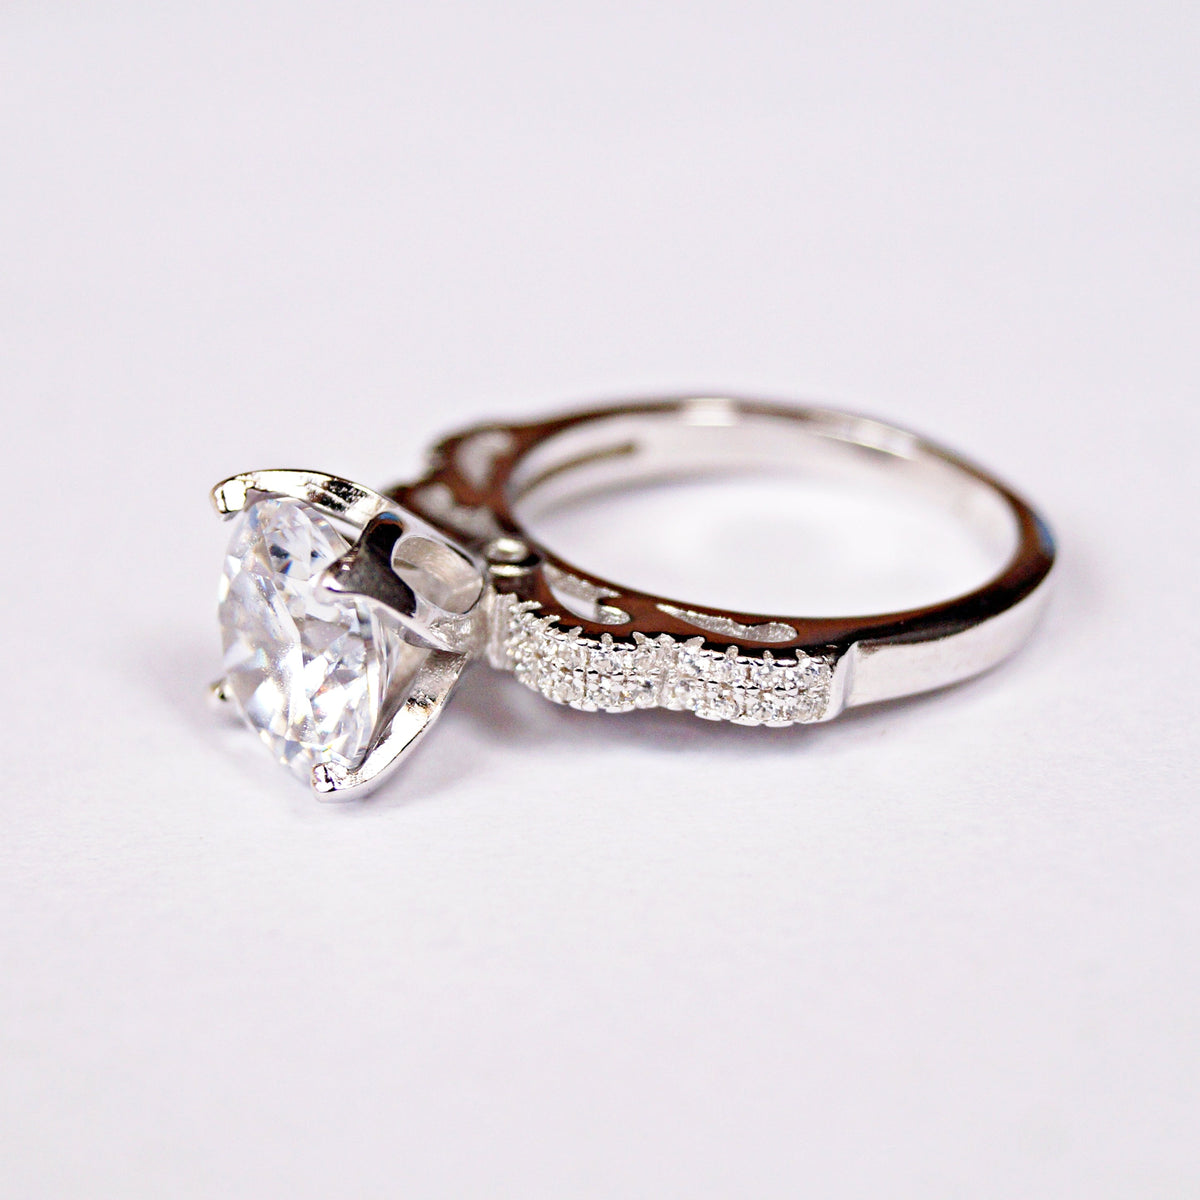 The Solitaire Flower Ring